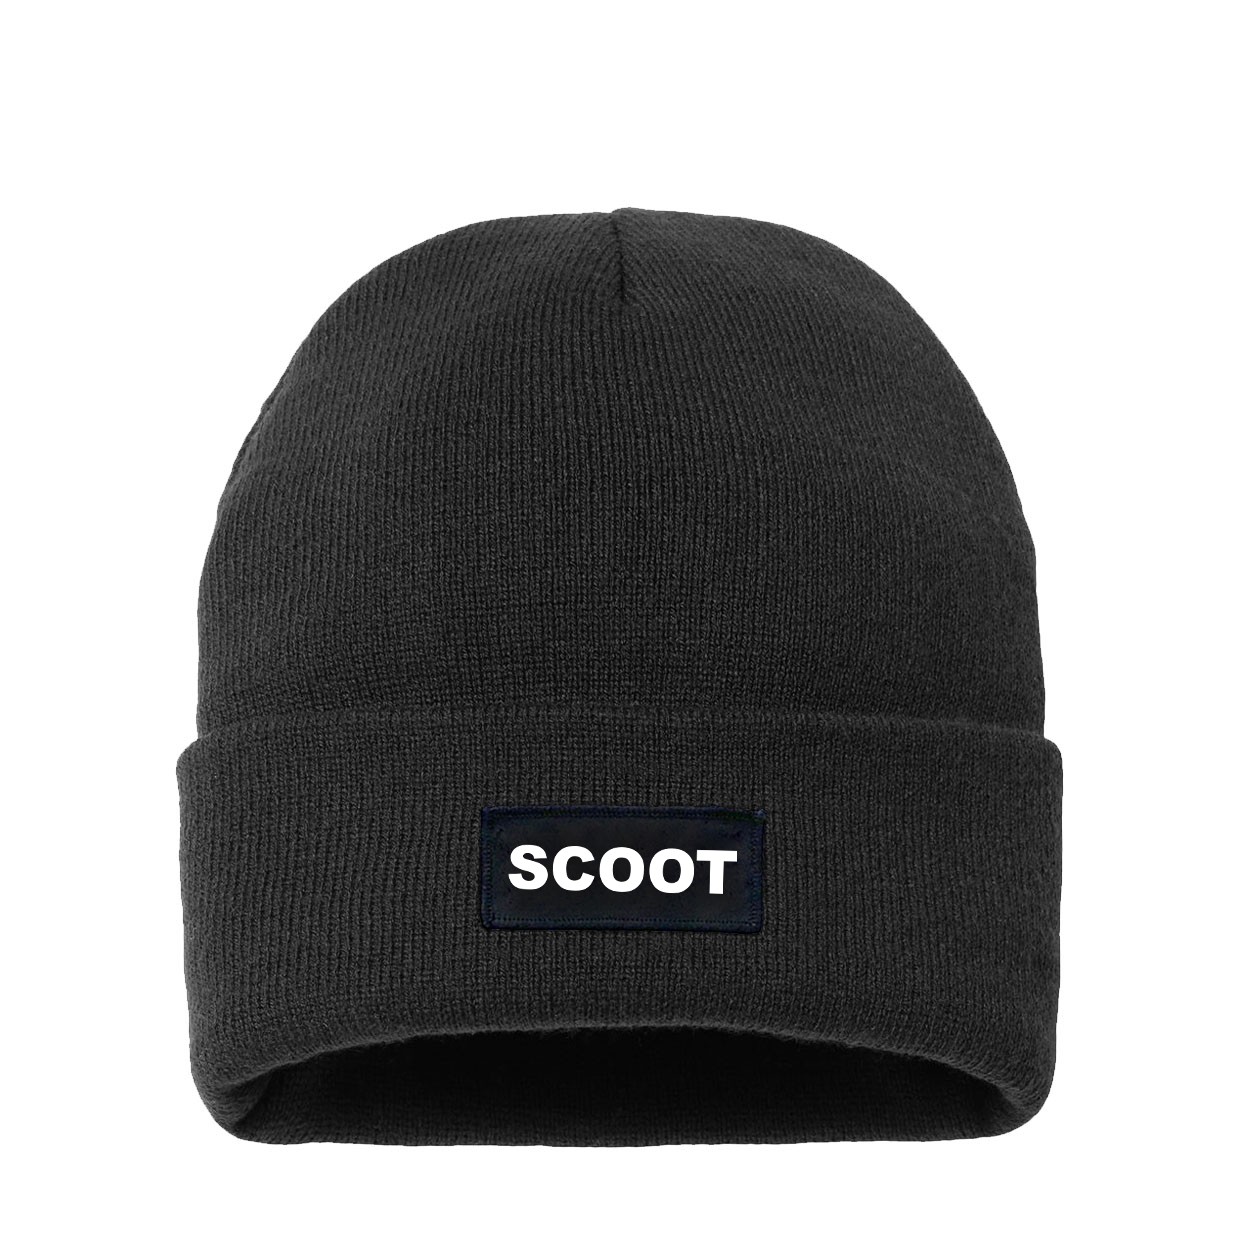 Scoot Brand Logo Night Out Woven Patch Night Out Sherpa Lined Cuffed Beanie Black